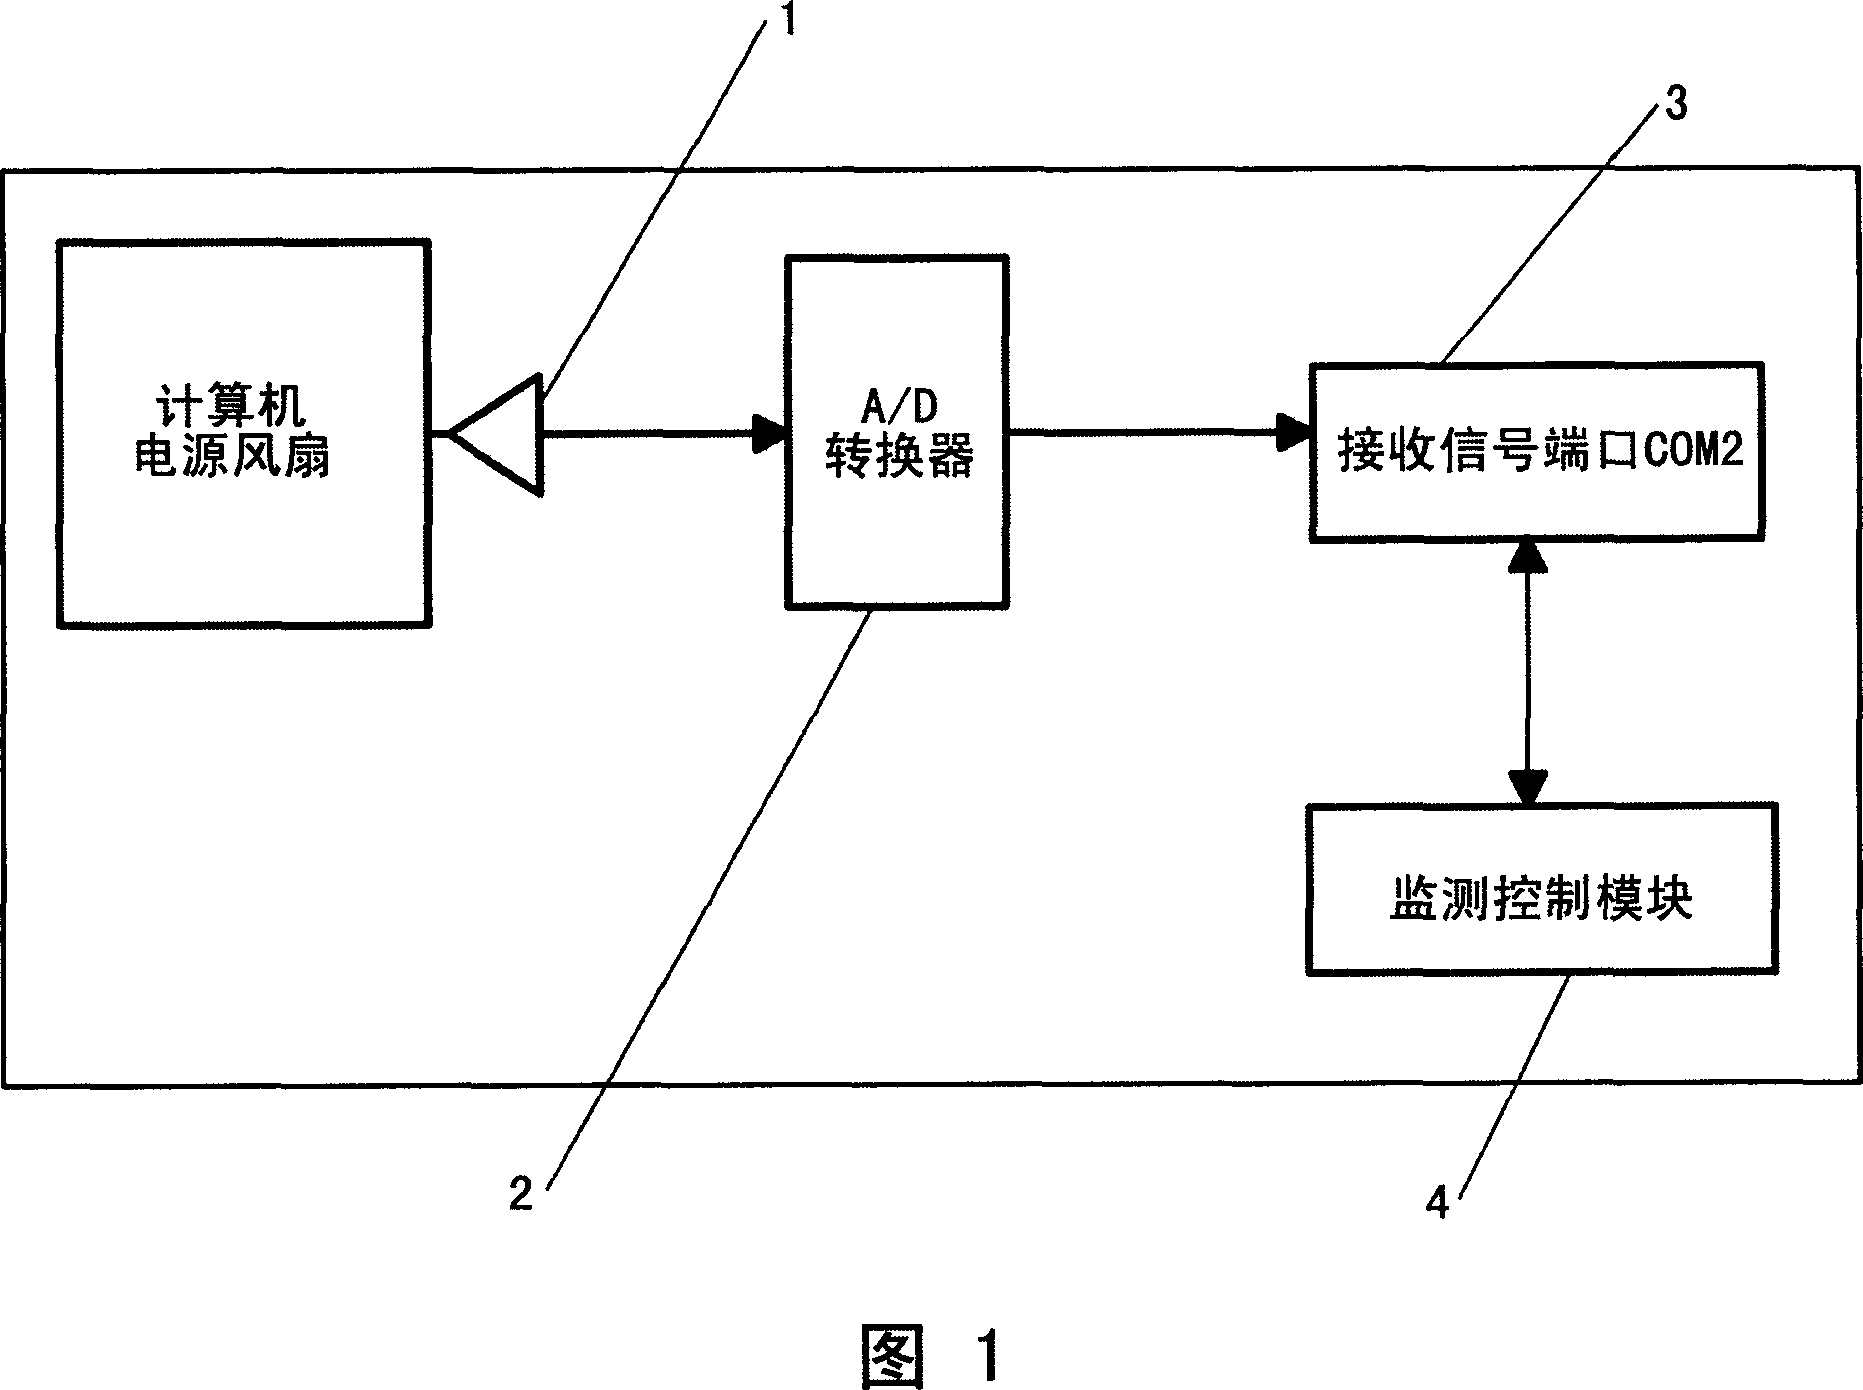 Method and device for monitoring status of computer power supply fan